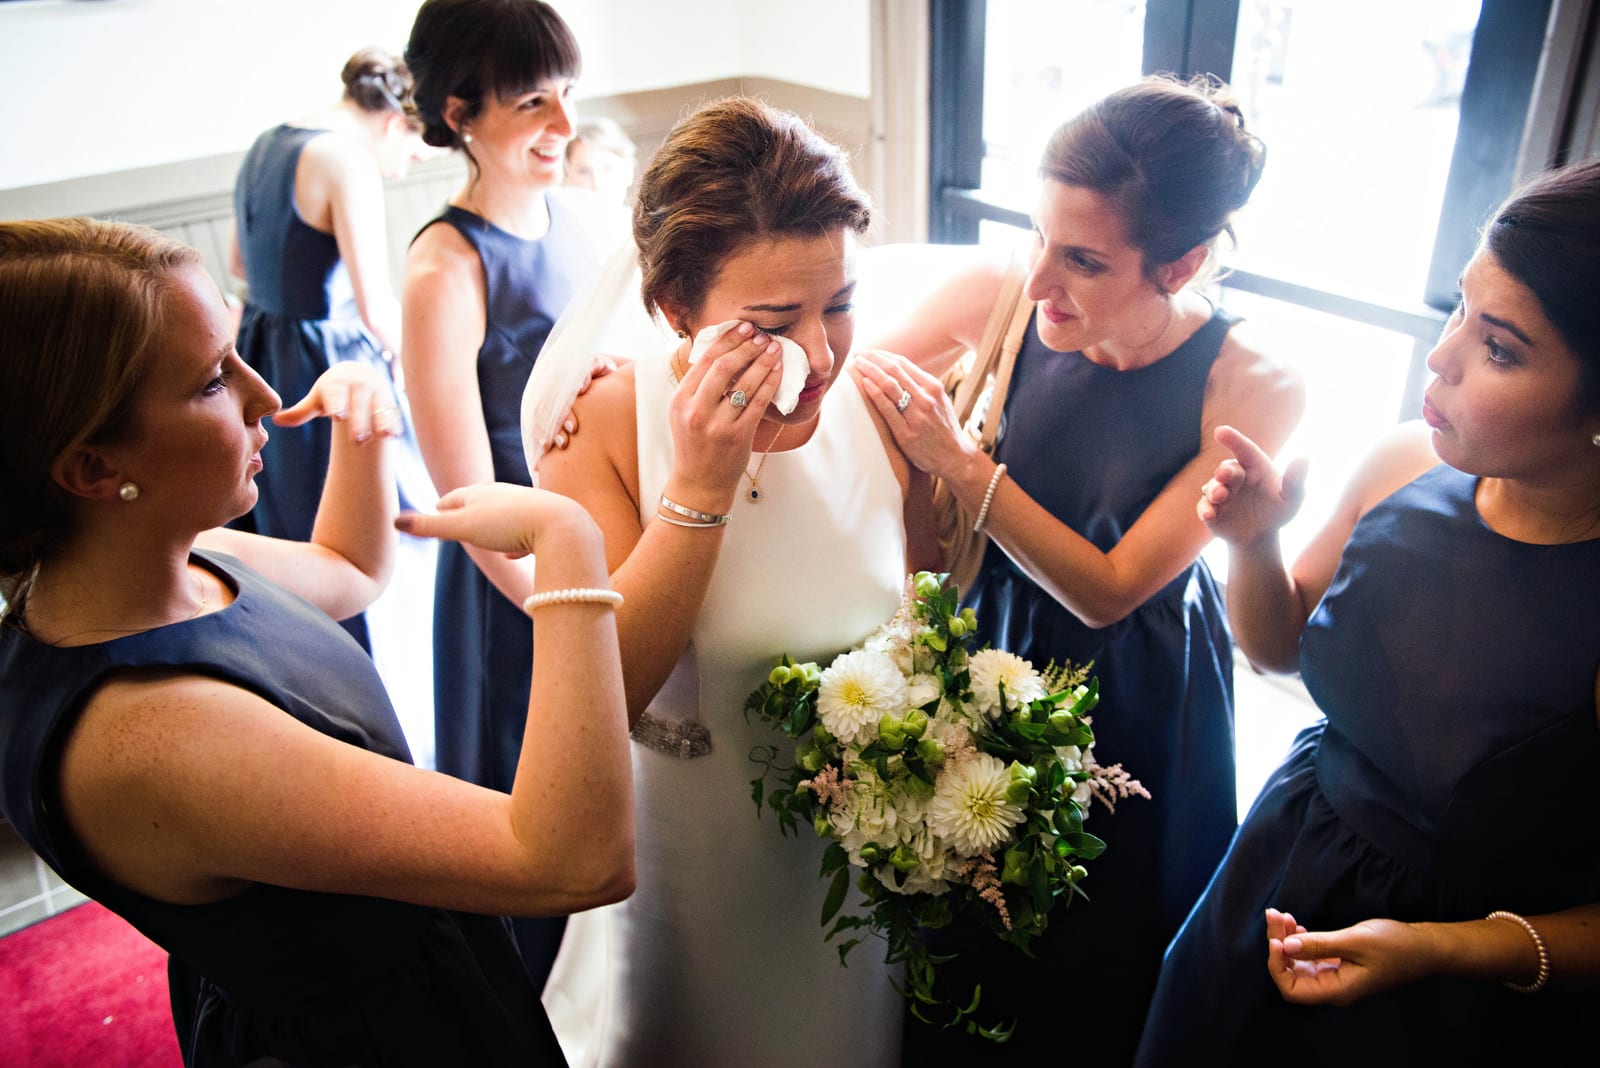 A bride wipes tears from her eyes as she is surrounded by bridesmaids before her wedding at St. Stanislaus church in the Strip District.